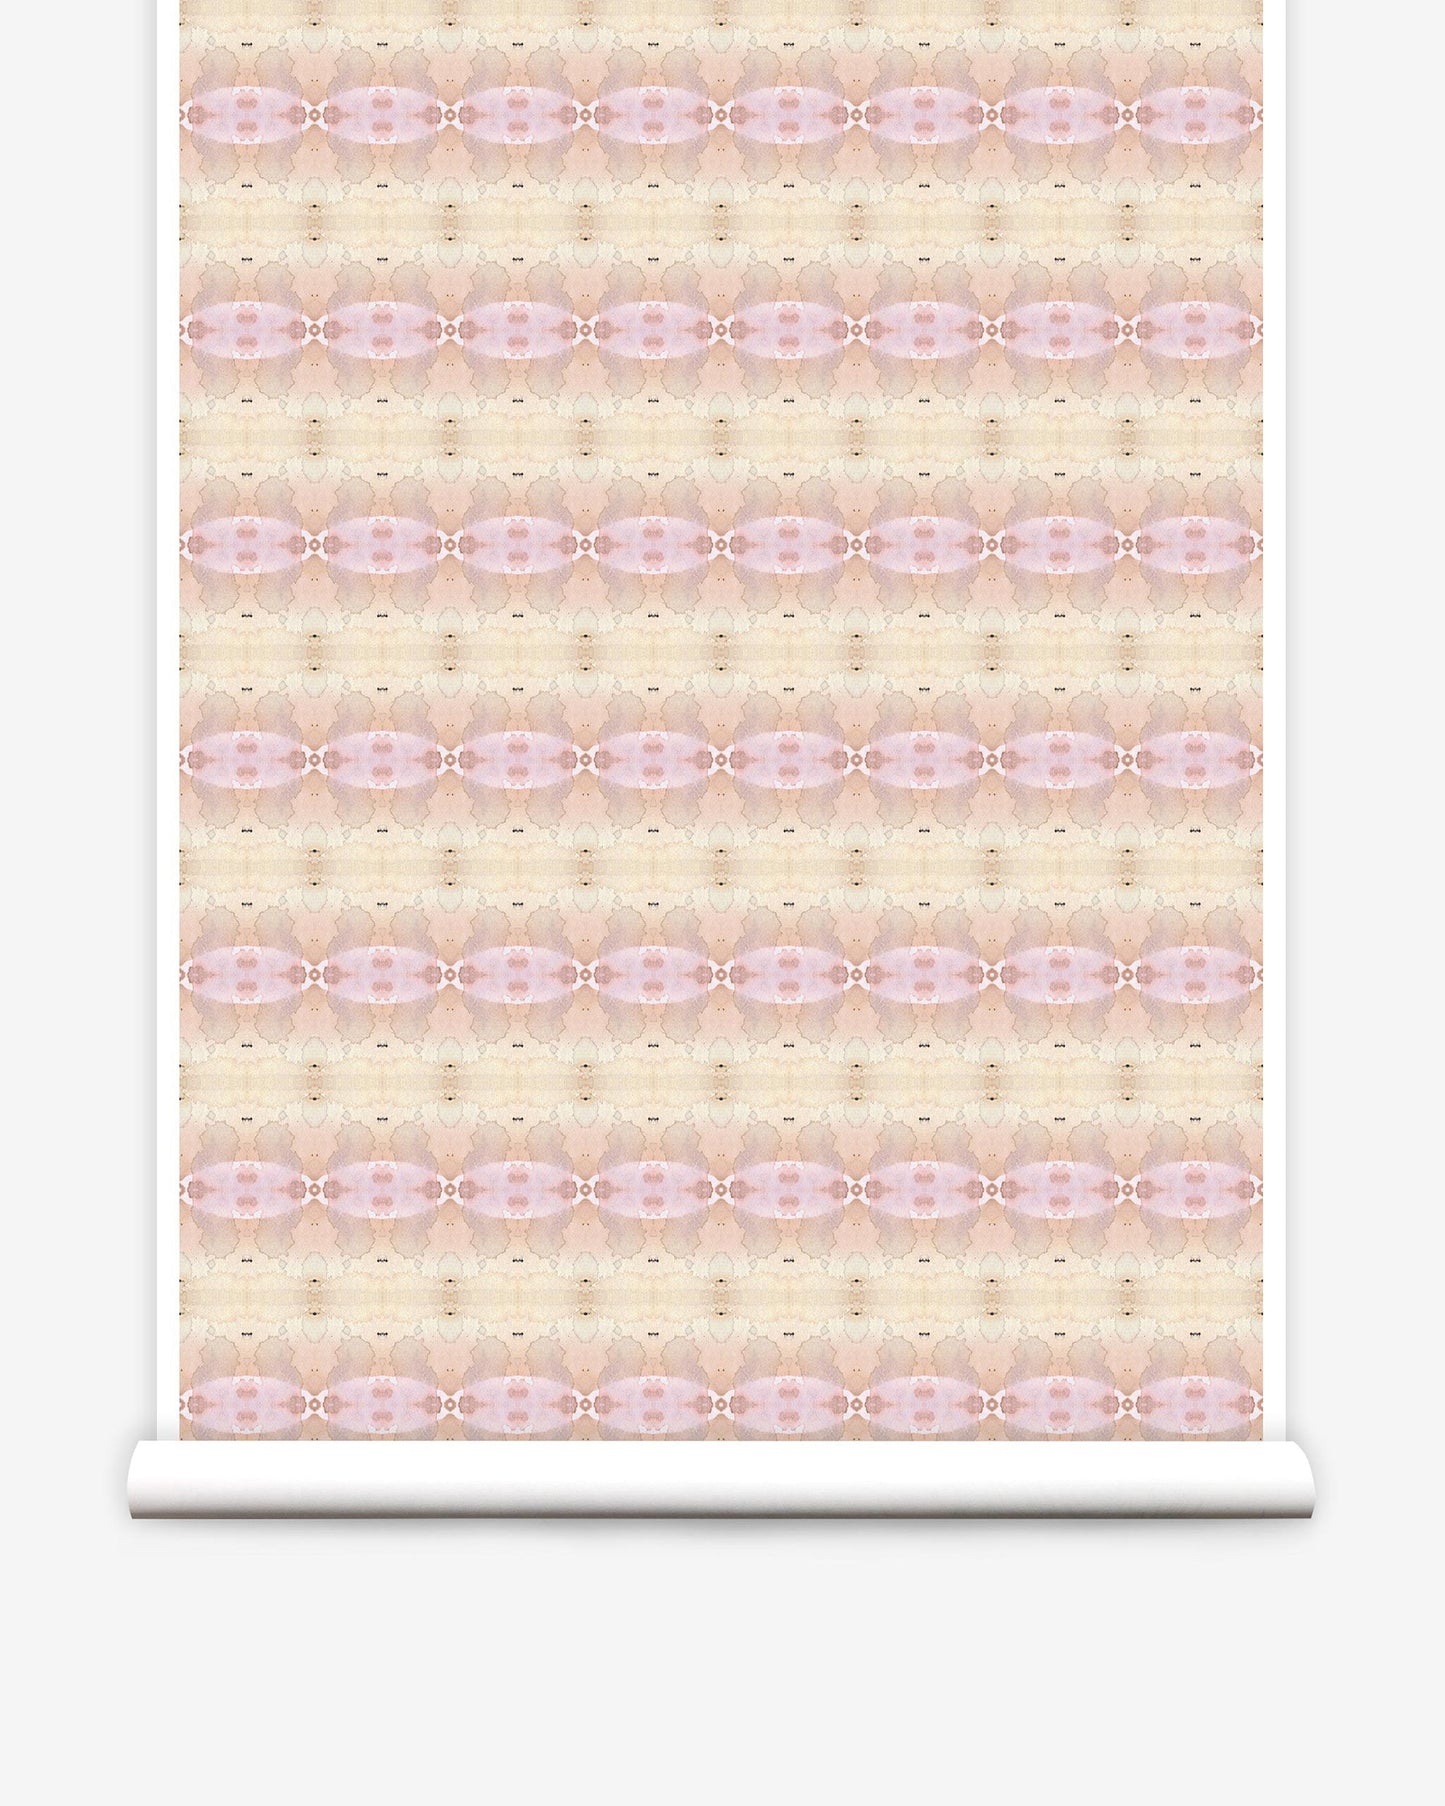 A pink and beige Setting Sun wallpaper on wallpaper